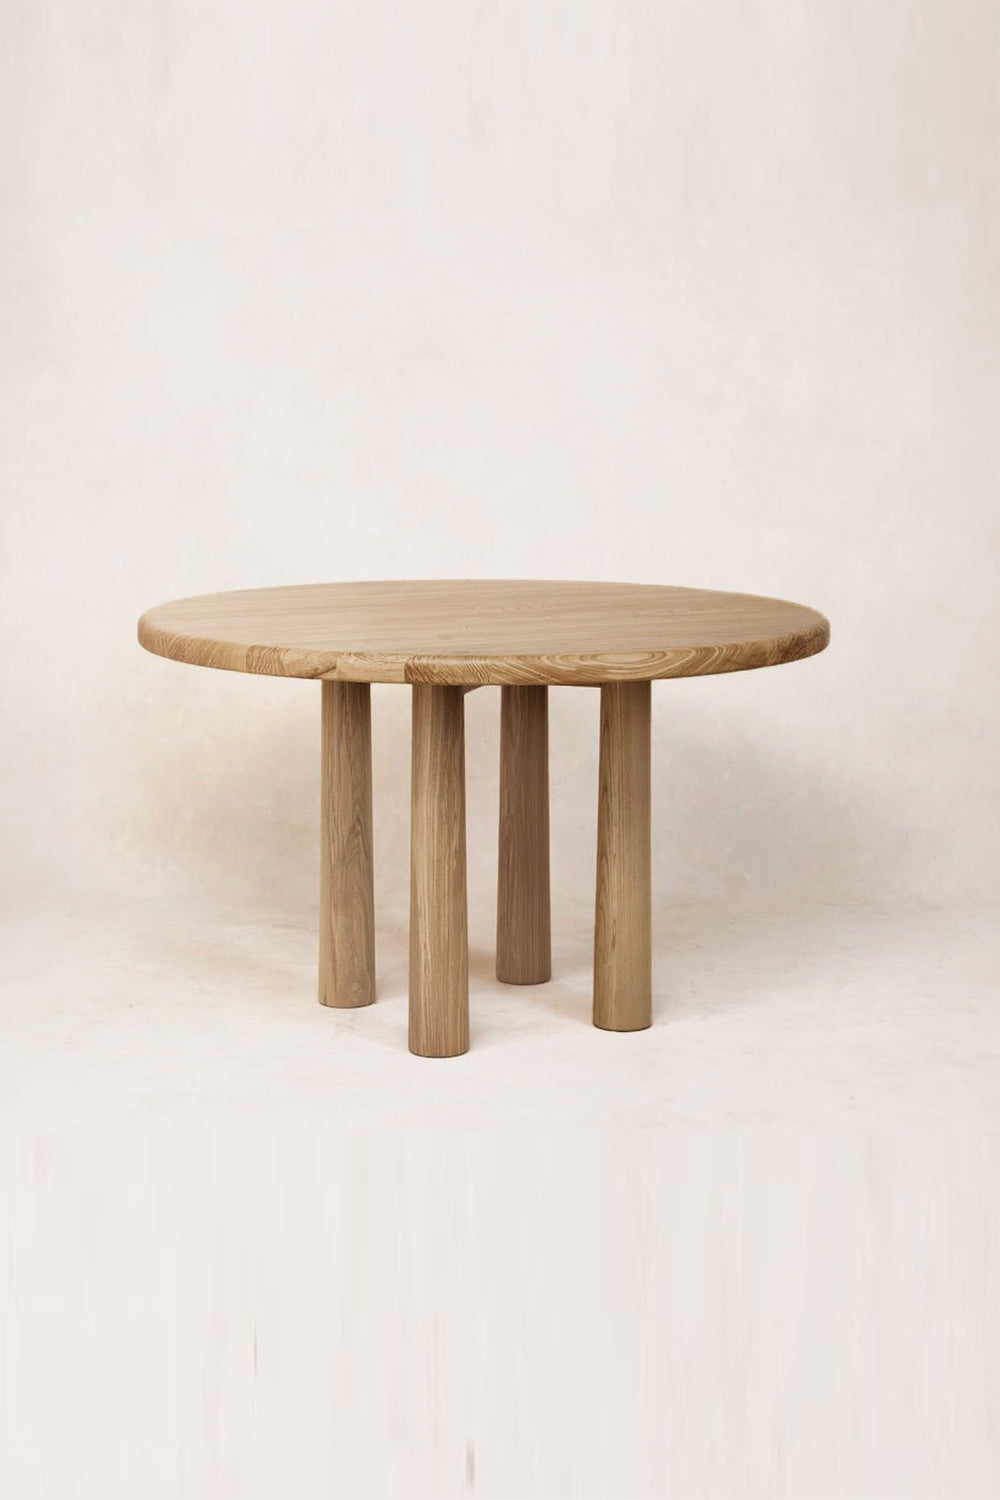 Round Topa Topa Dining Table - White Oak Dining Tables